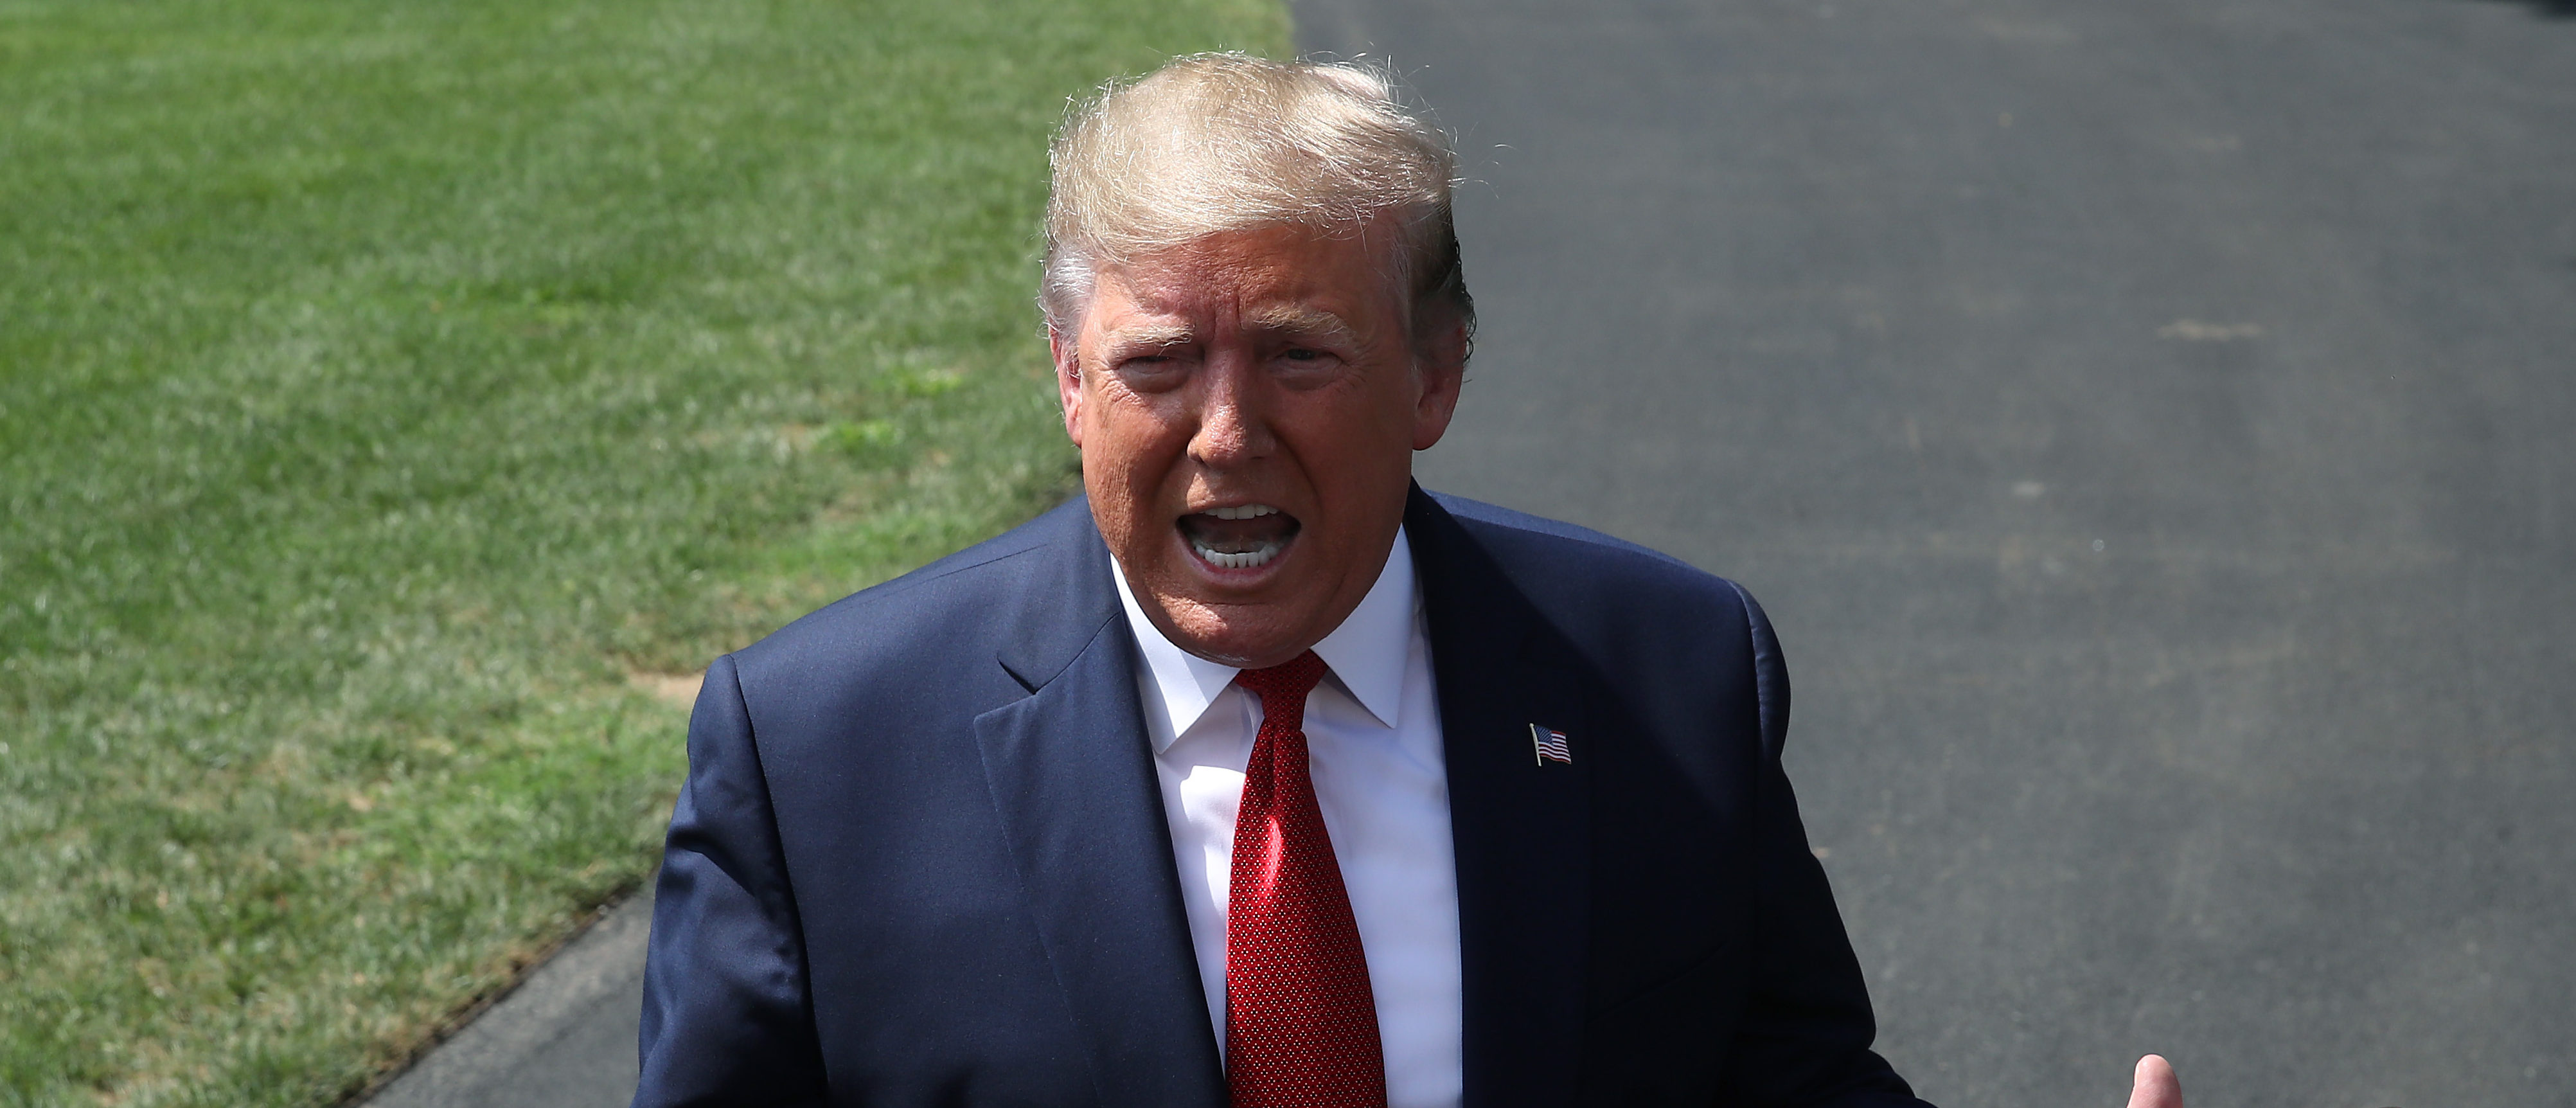 U.S. President Donald Trump speaks to the media before departing from the White House on Aug. 21, 2019 in Washington, D.C. (Mark Wilson/Getty Images)